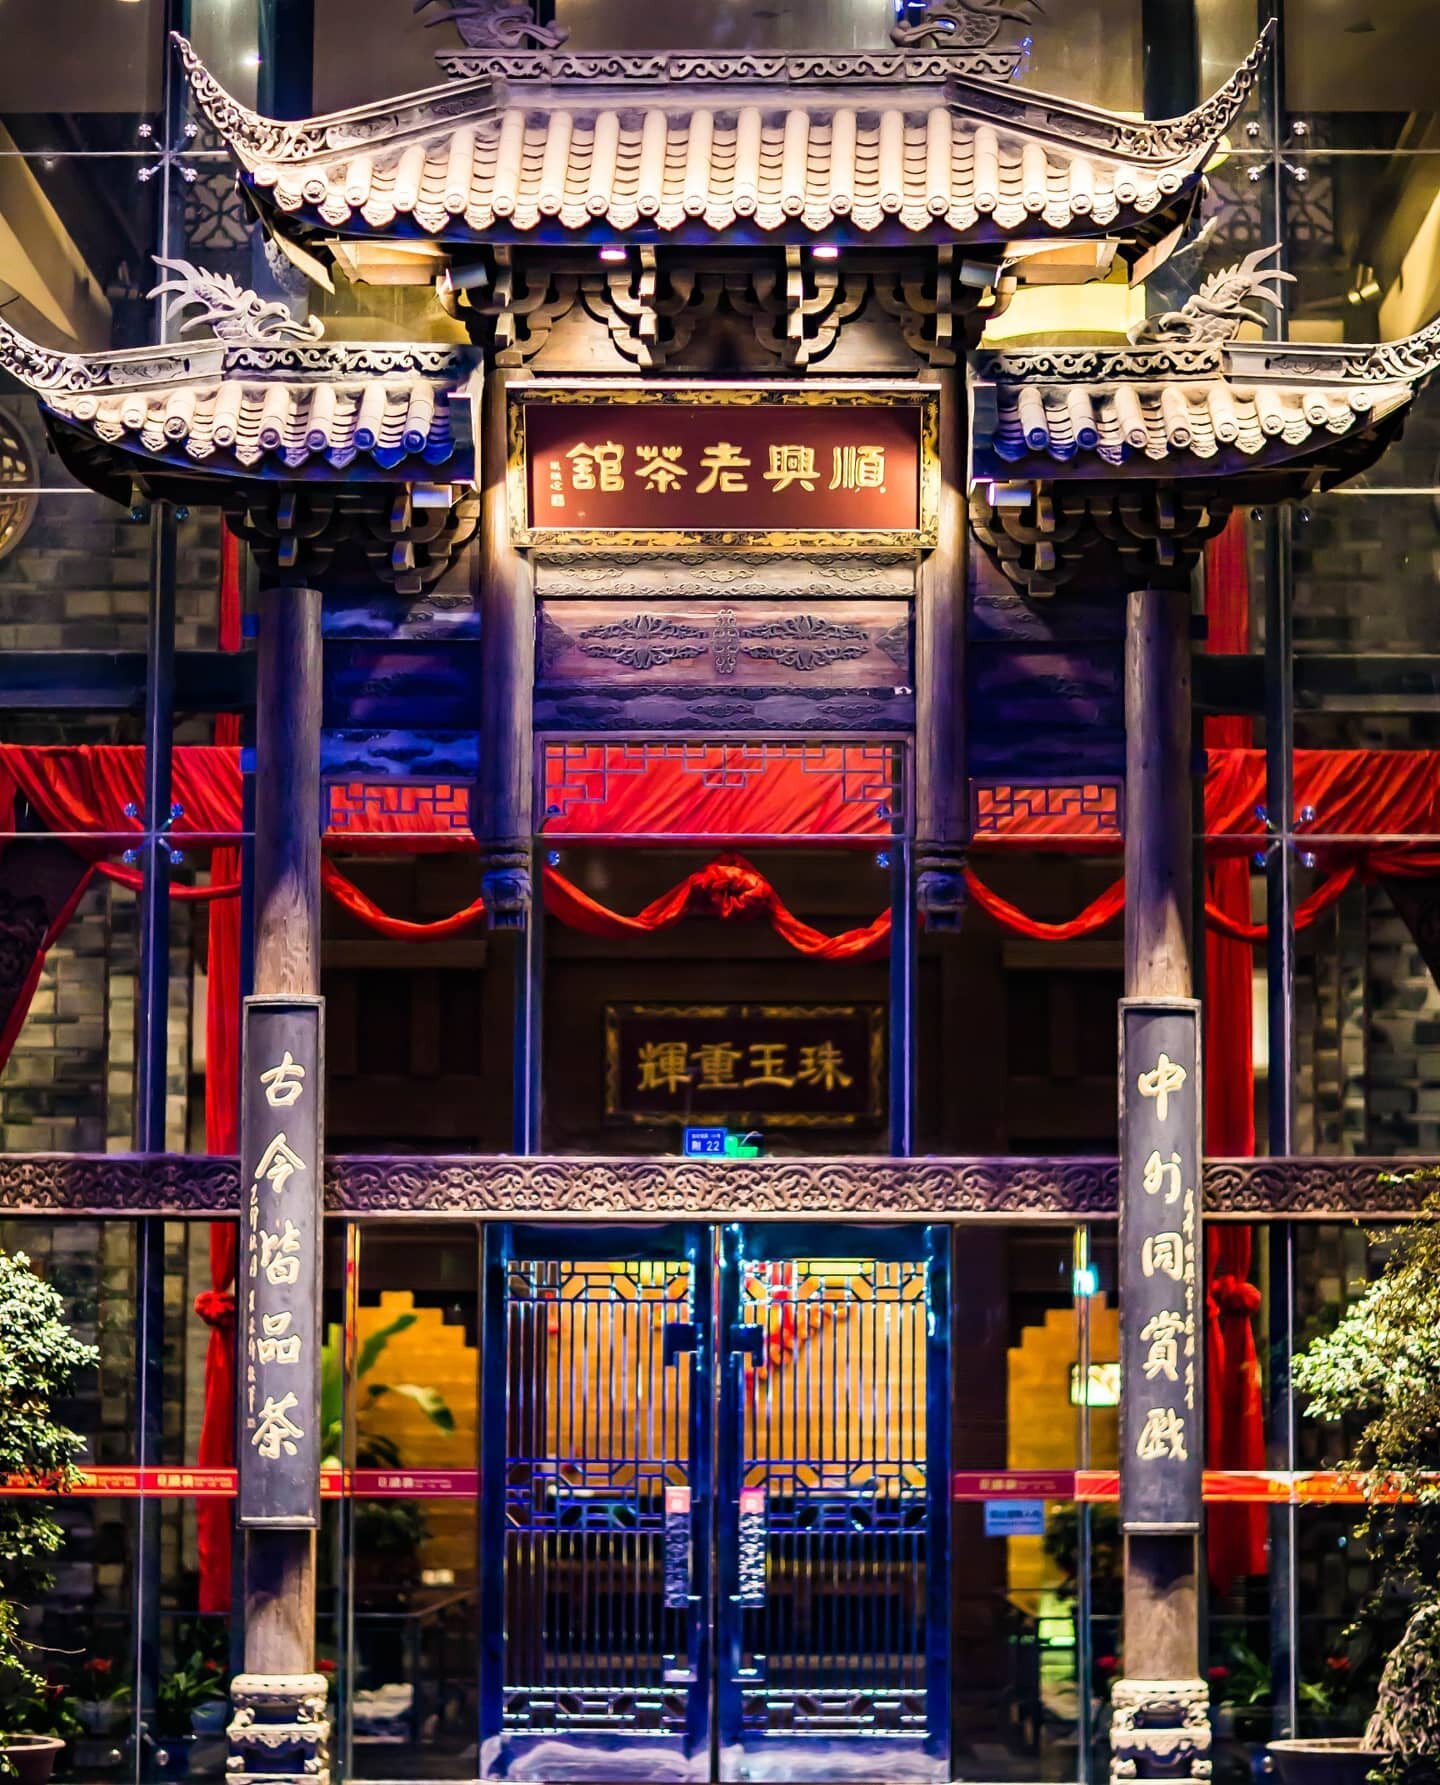 Shunxing Old Tea House is a collection of Ming and Qing architecture, wall carvings, window decorations, wood carvings, furniture, tea sets, etc., based on the style of famous teahouses and teahouses in the past in Chengdu, and hired senior tea cultu